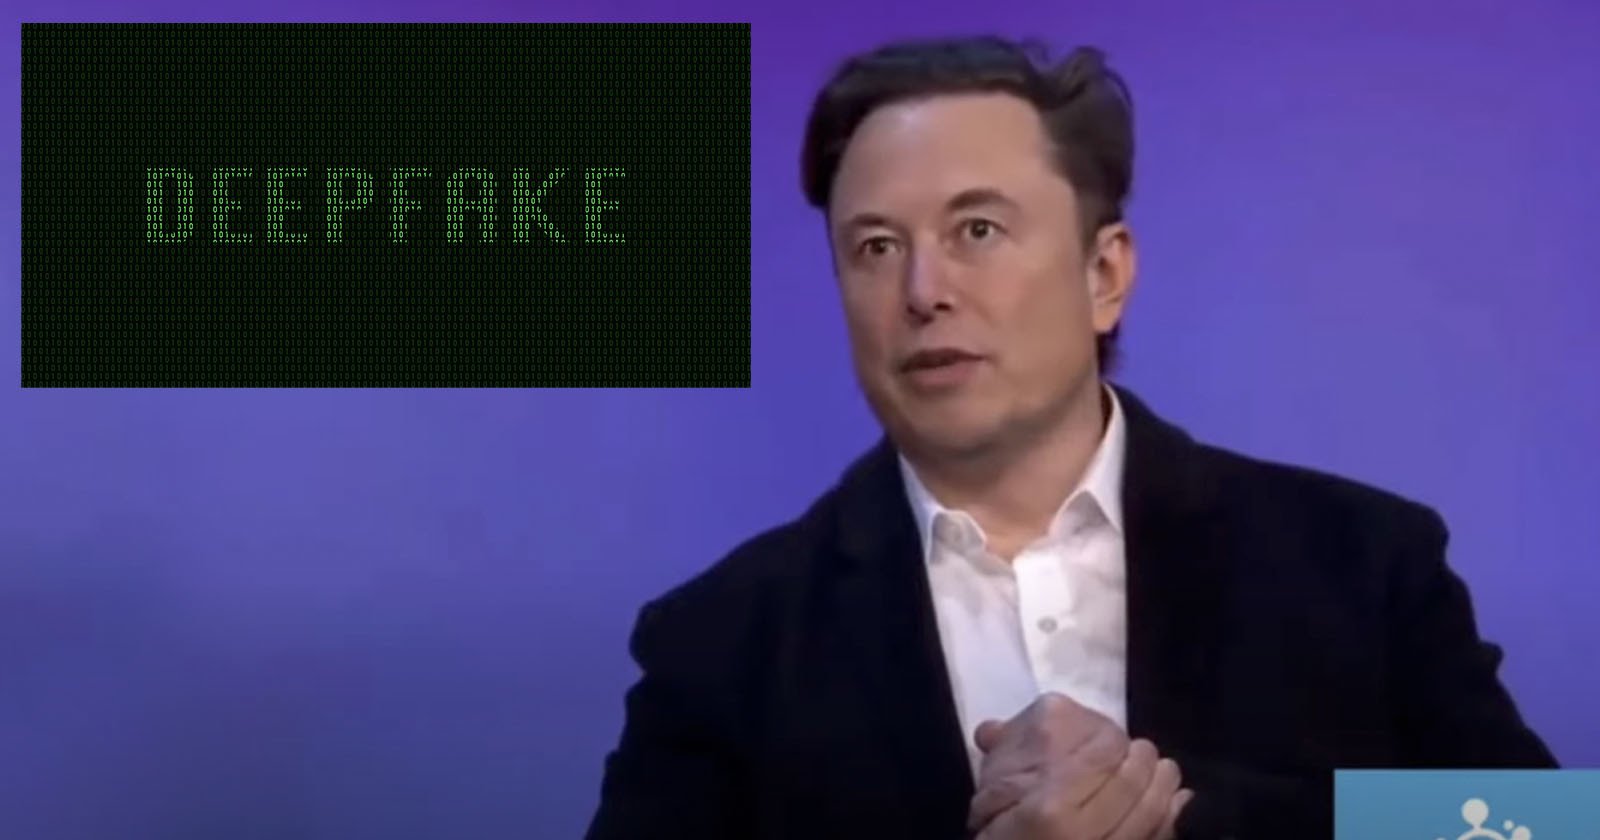 A Deep Faked Elon Musk is Scamming People on YouTube